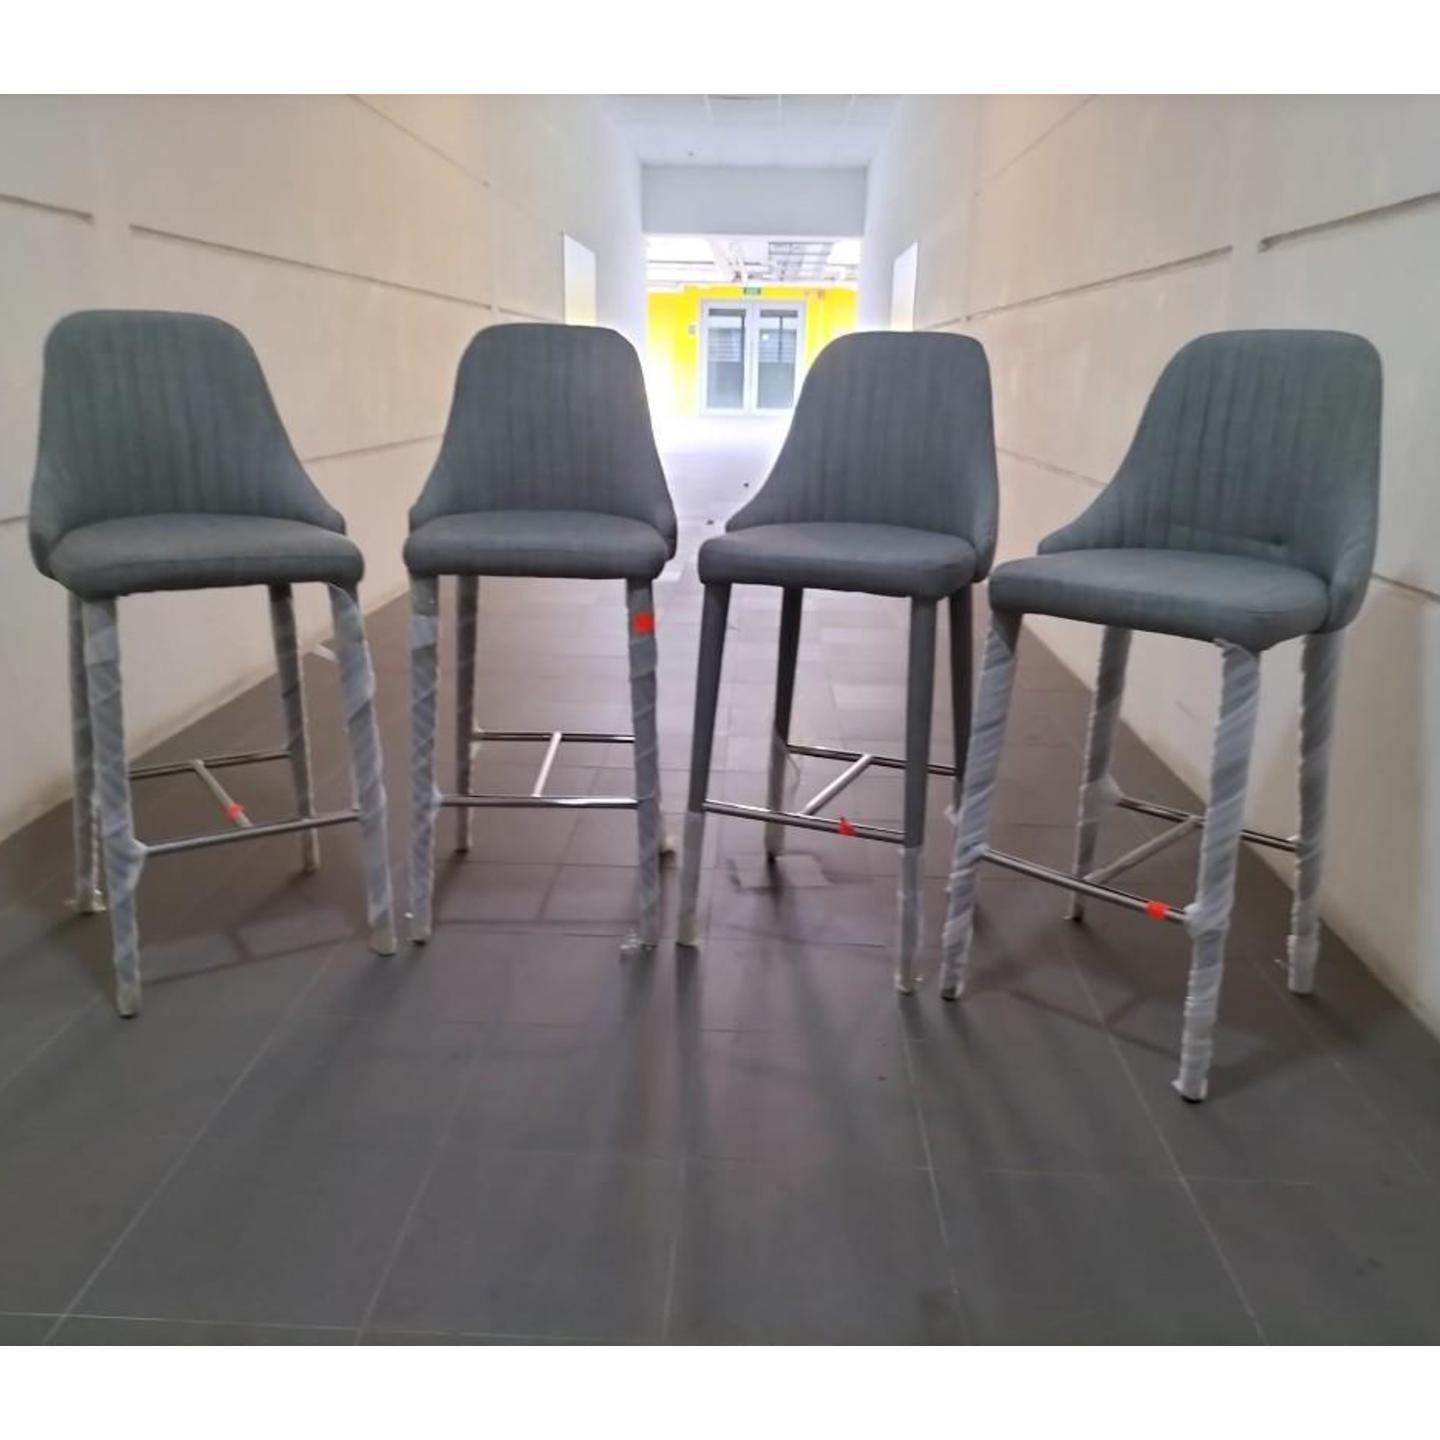 4 x HACHER Counter Stools in GREY Fabric